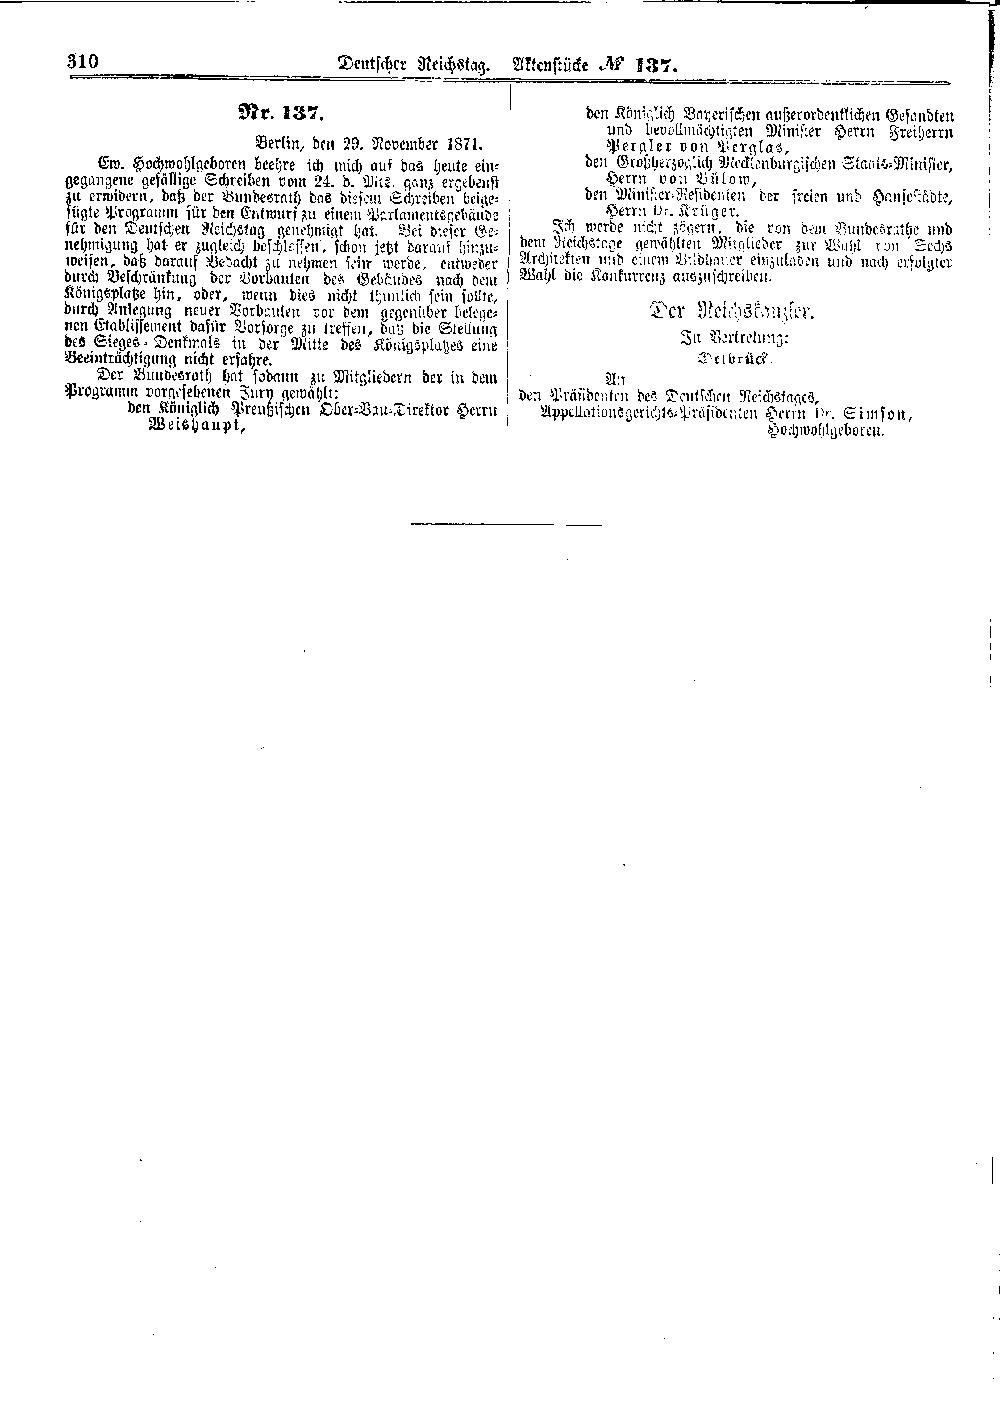 Scan of page 310